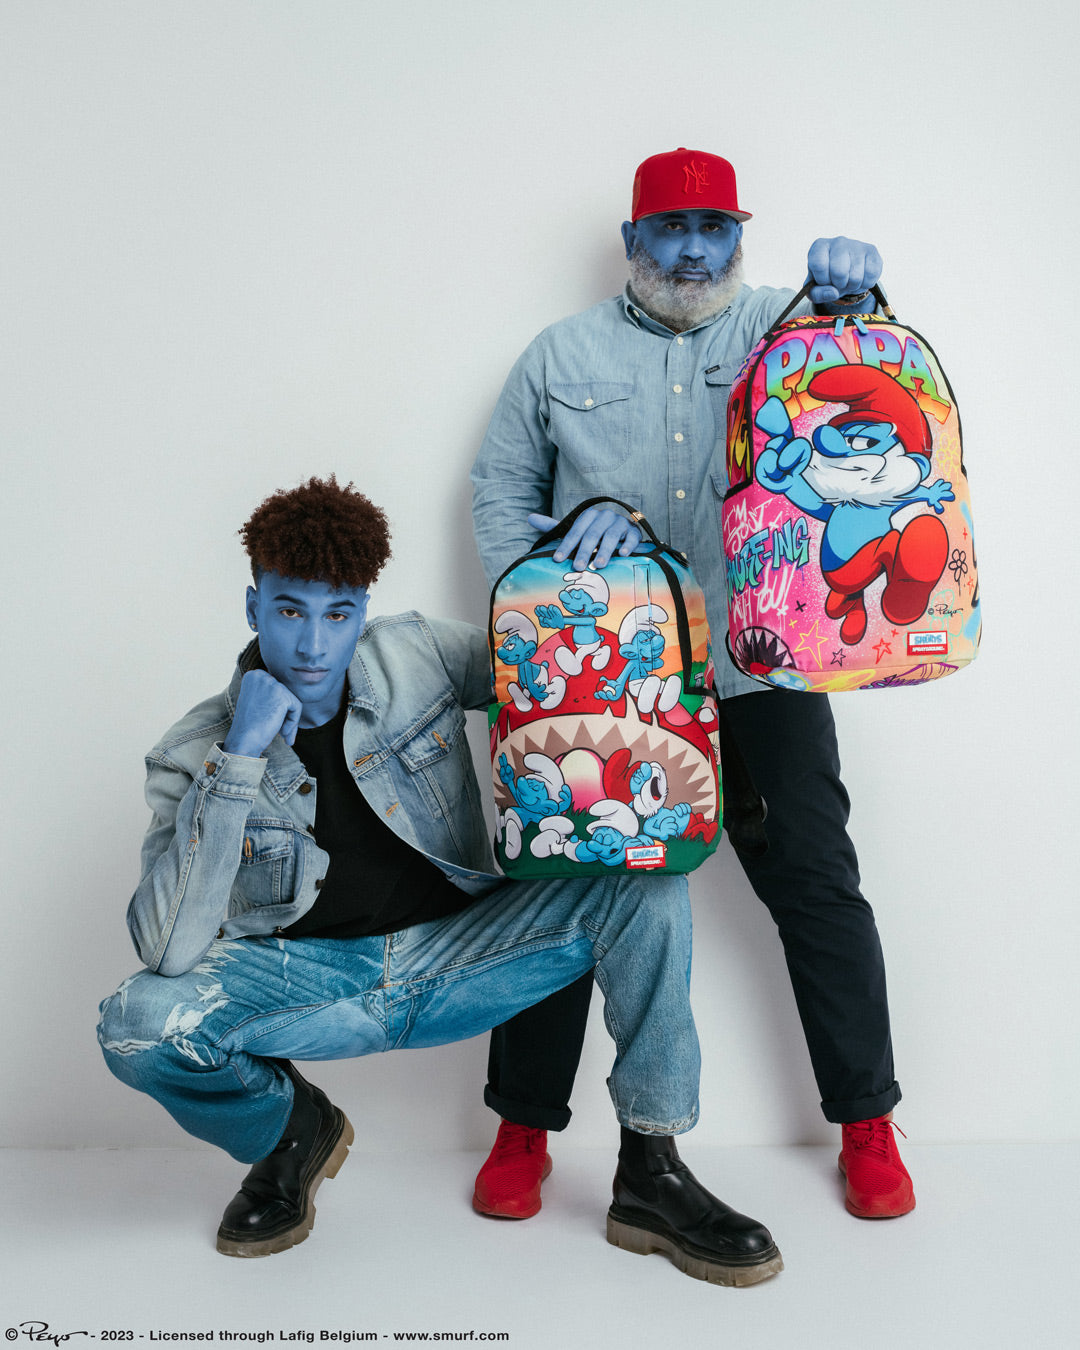 SPRAYGROUND SMURF BACKPACK TOUGH SMURFS New In Bag LIMITED EDITION